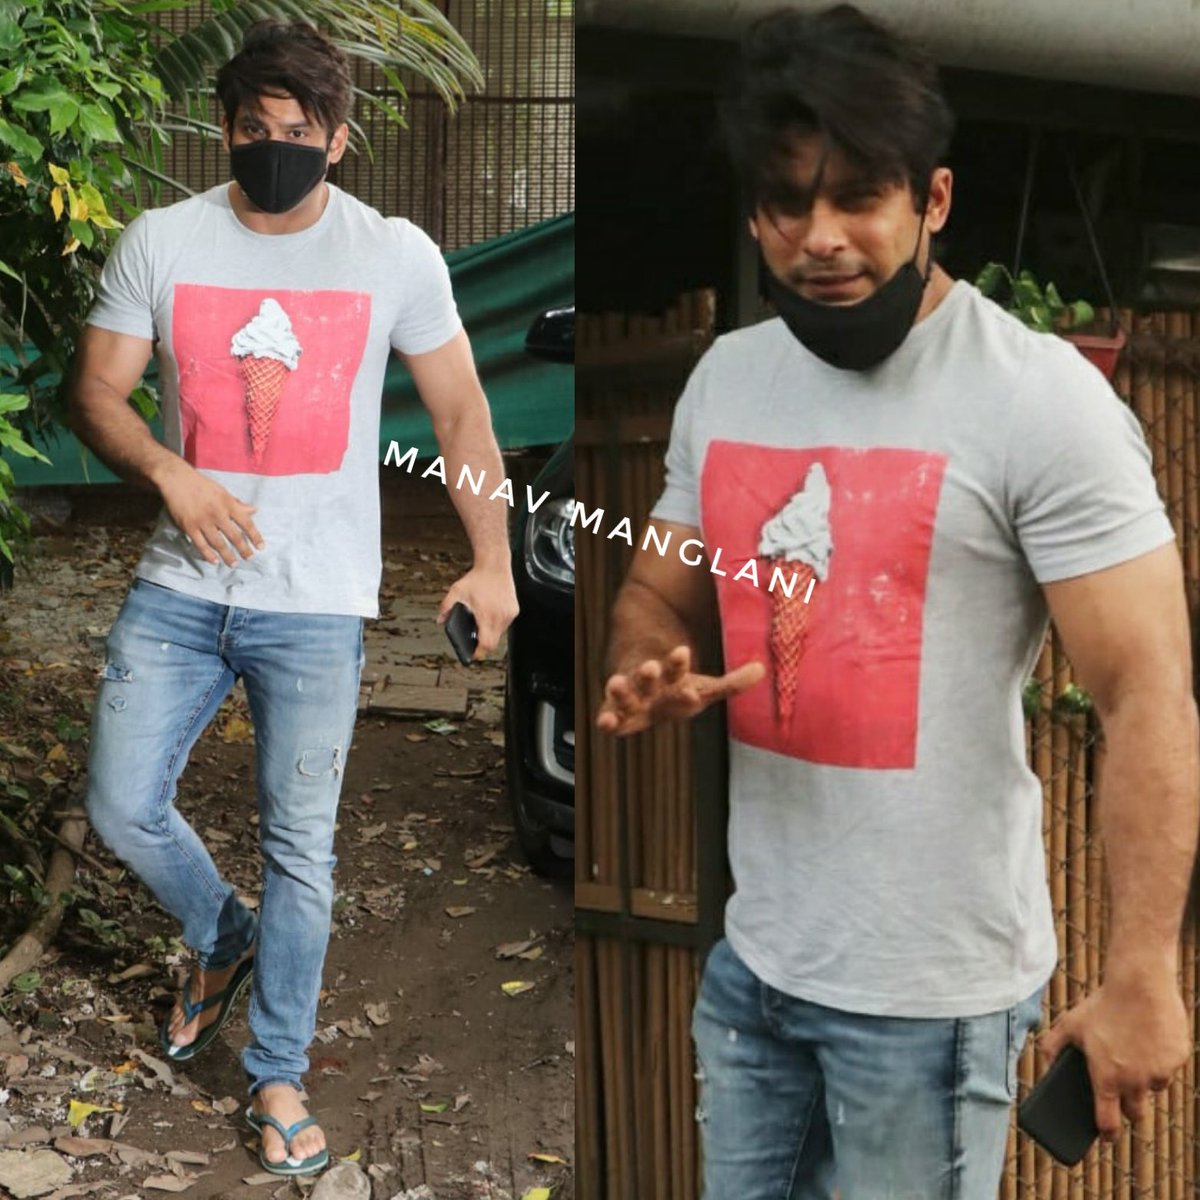 Cool in casuals #SidharthShukla snapped round and about in Mumbai today 
#instalove #BigBoss #wednesday #paparazzi #pictureperfect #ManavManglani